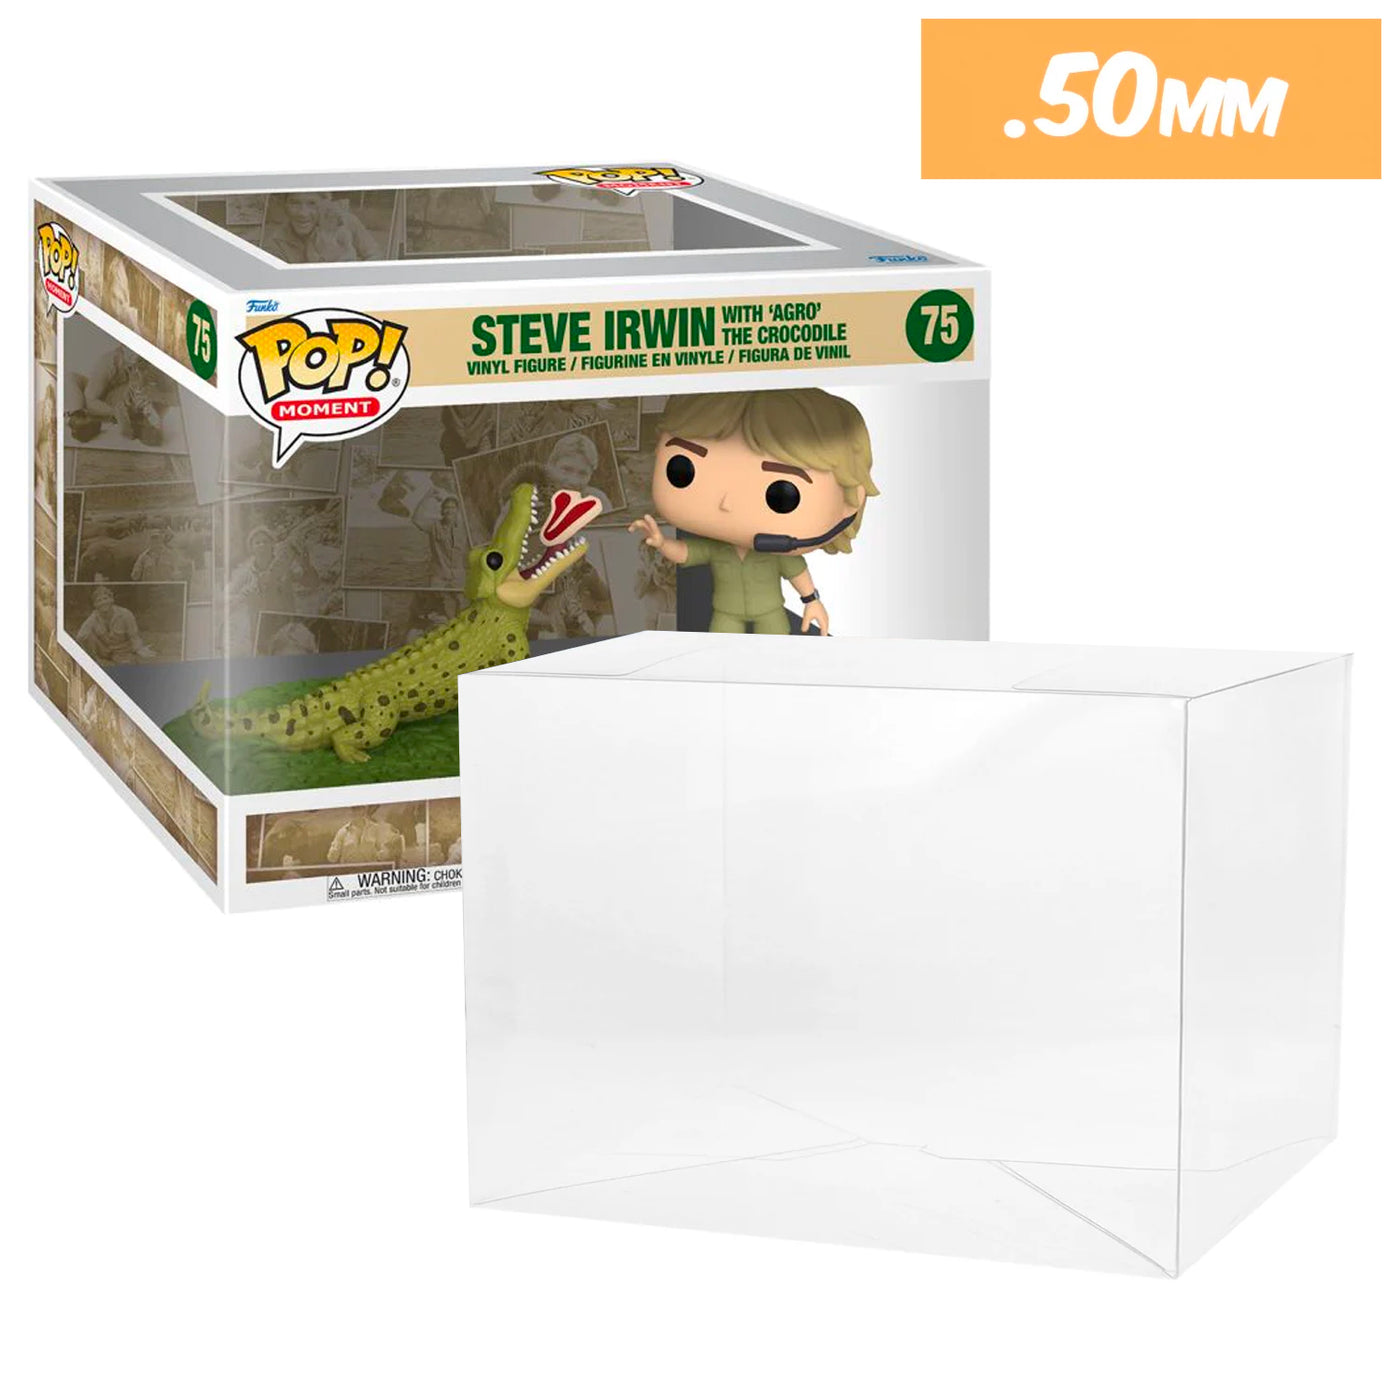 steve irwin with agro the crocodile 75 pop moment best funko pop protectors thick strong uv scratch flat top stack vinyl display geek plastic shield vaulted eco armor fits collect protect display case kollector